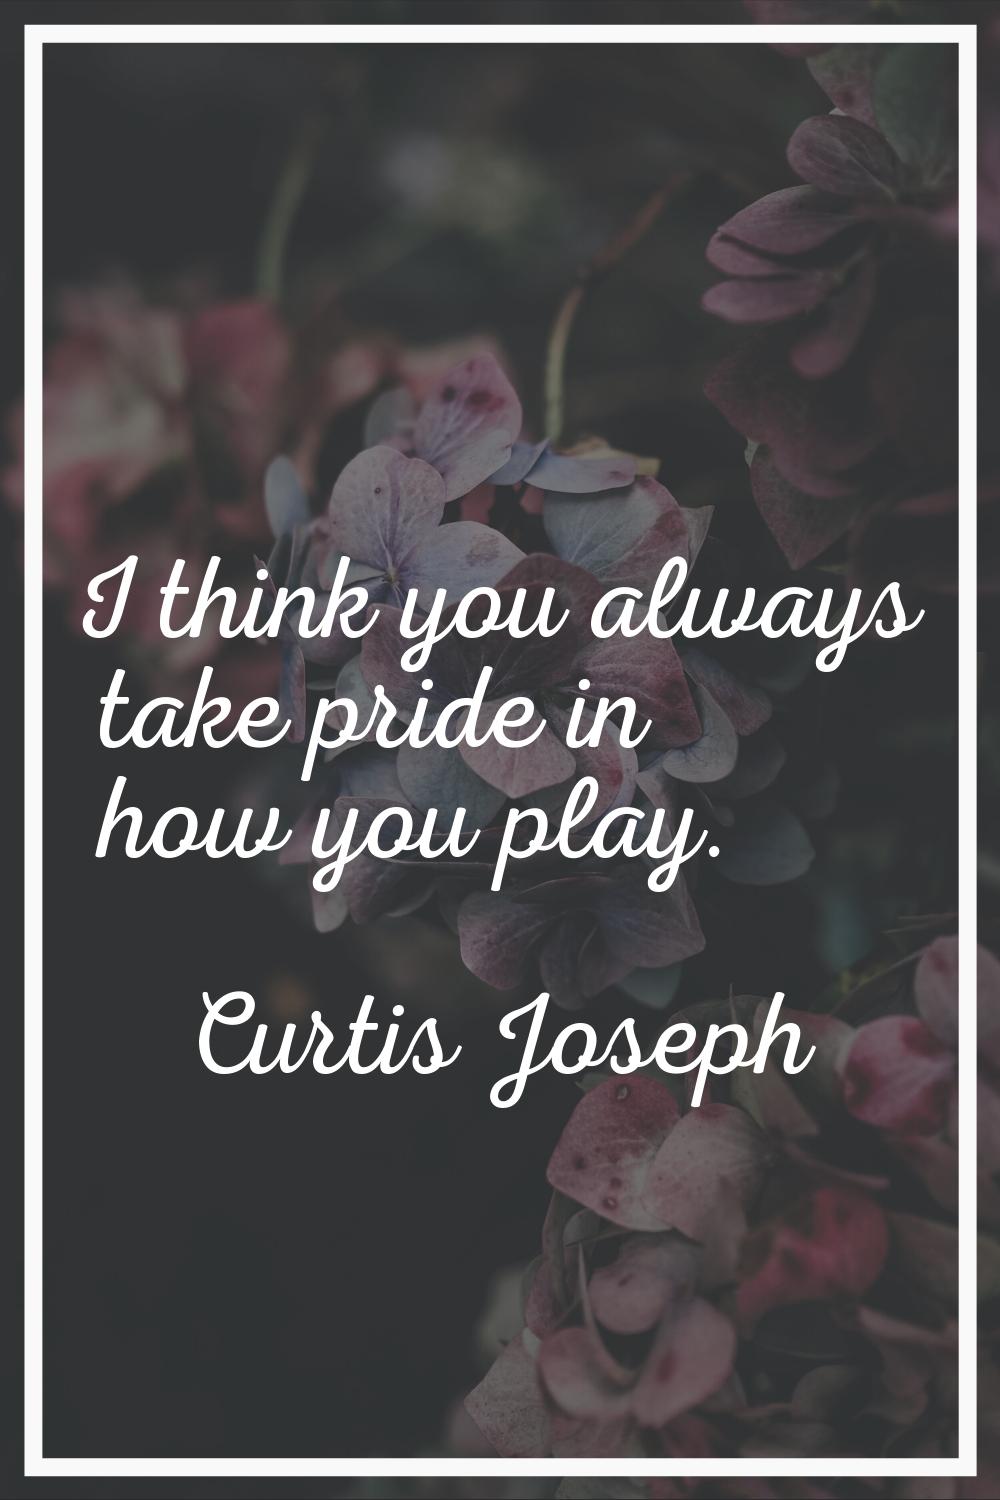 I think you always take pride in how you play.